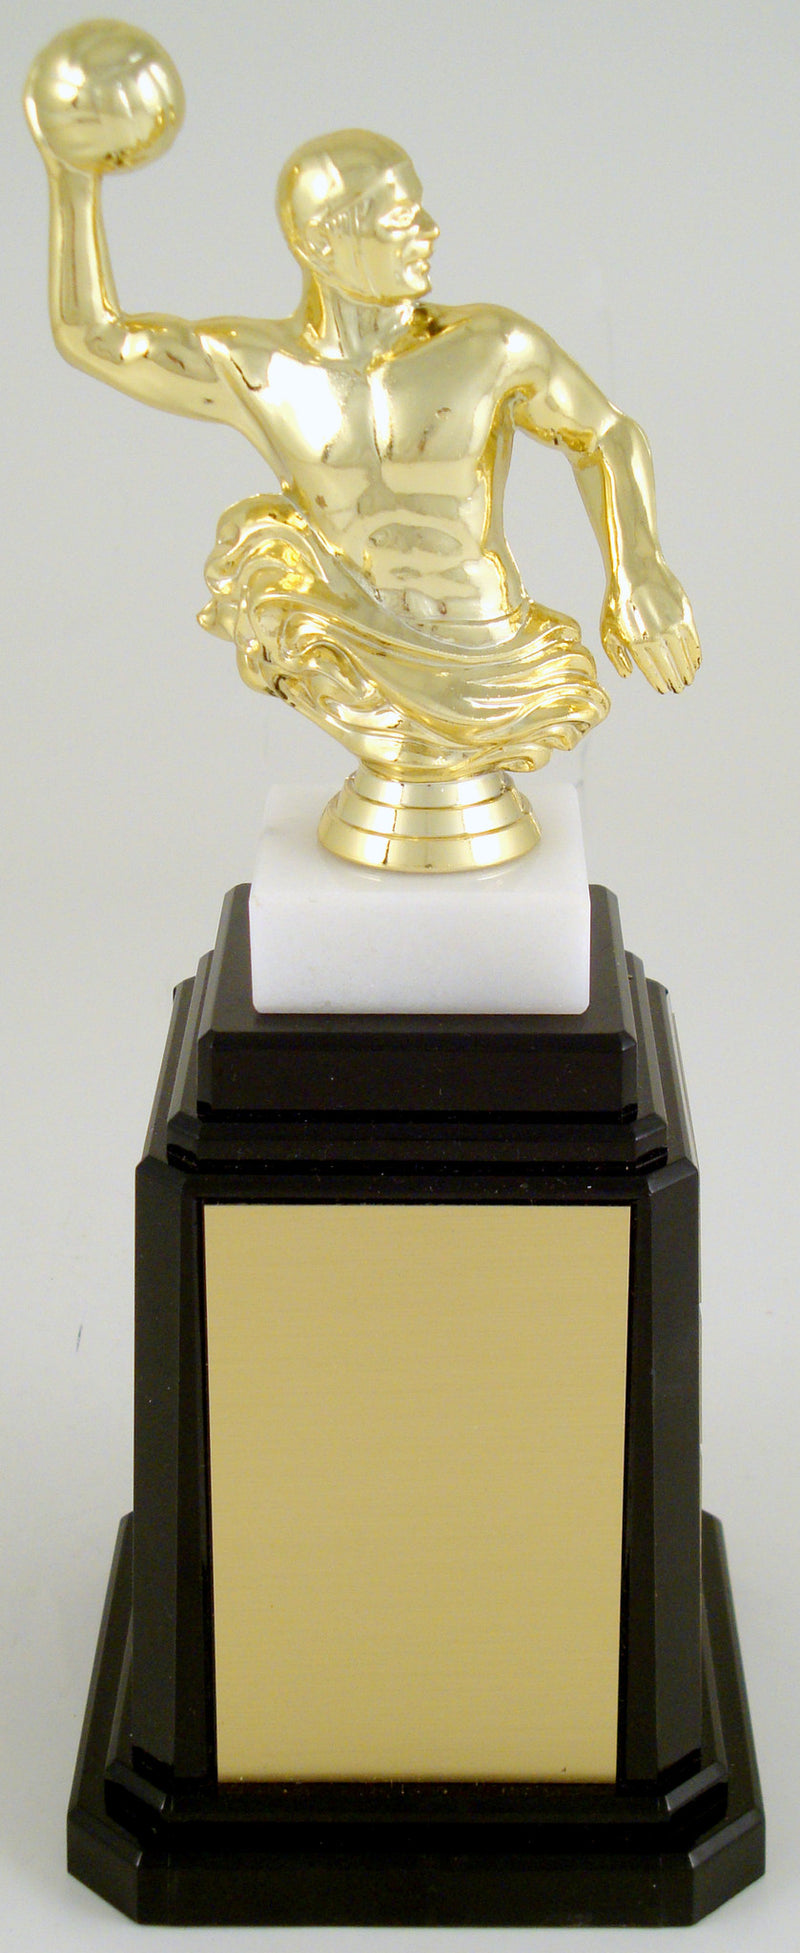 Water Polo Player Tower Base Trophy-Trophy-Schoppy&